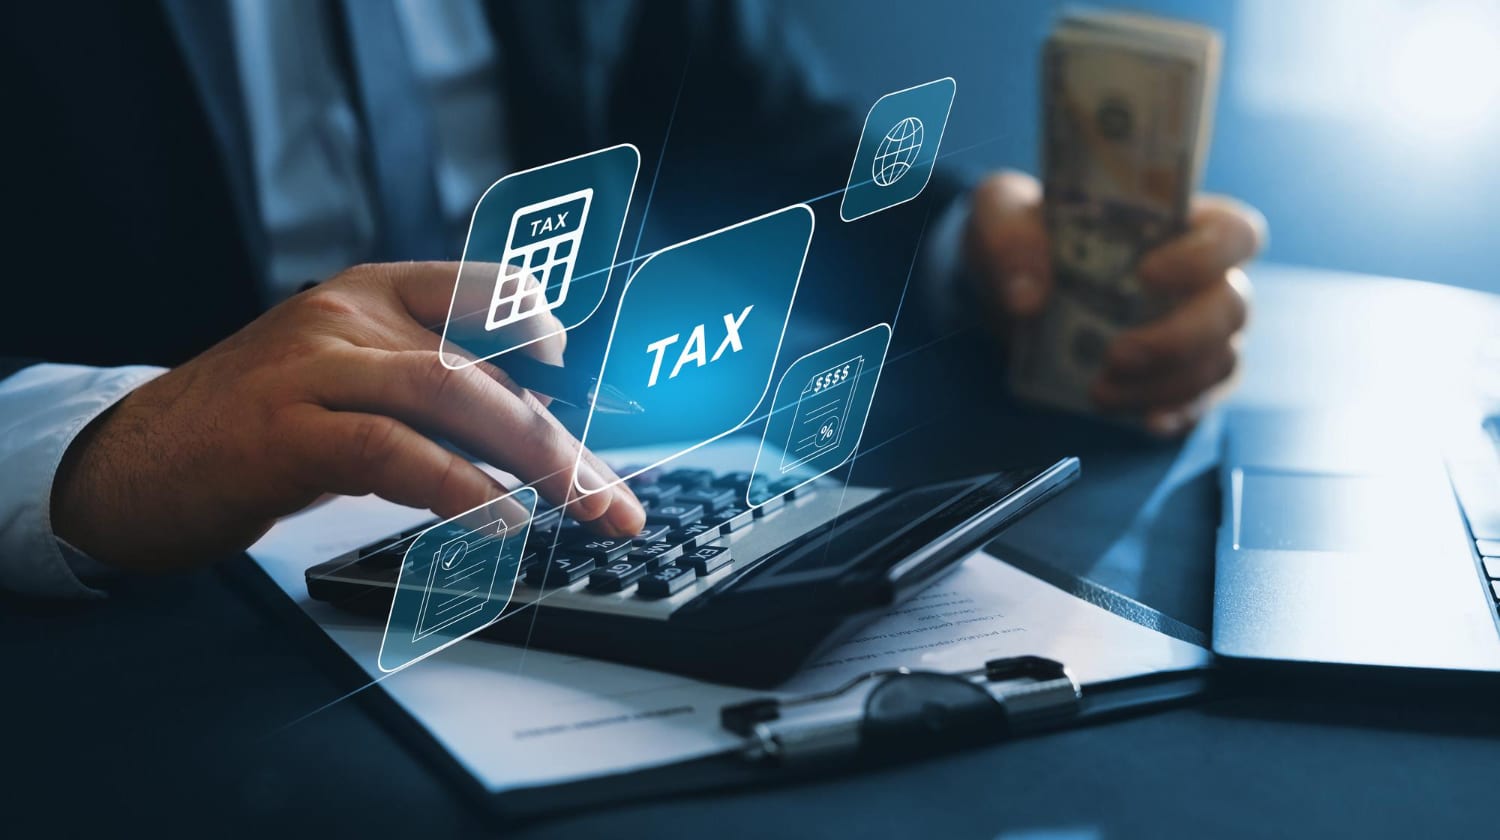 Professional Calculating Taxes With Digital Interface Display